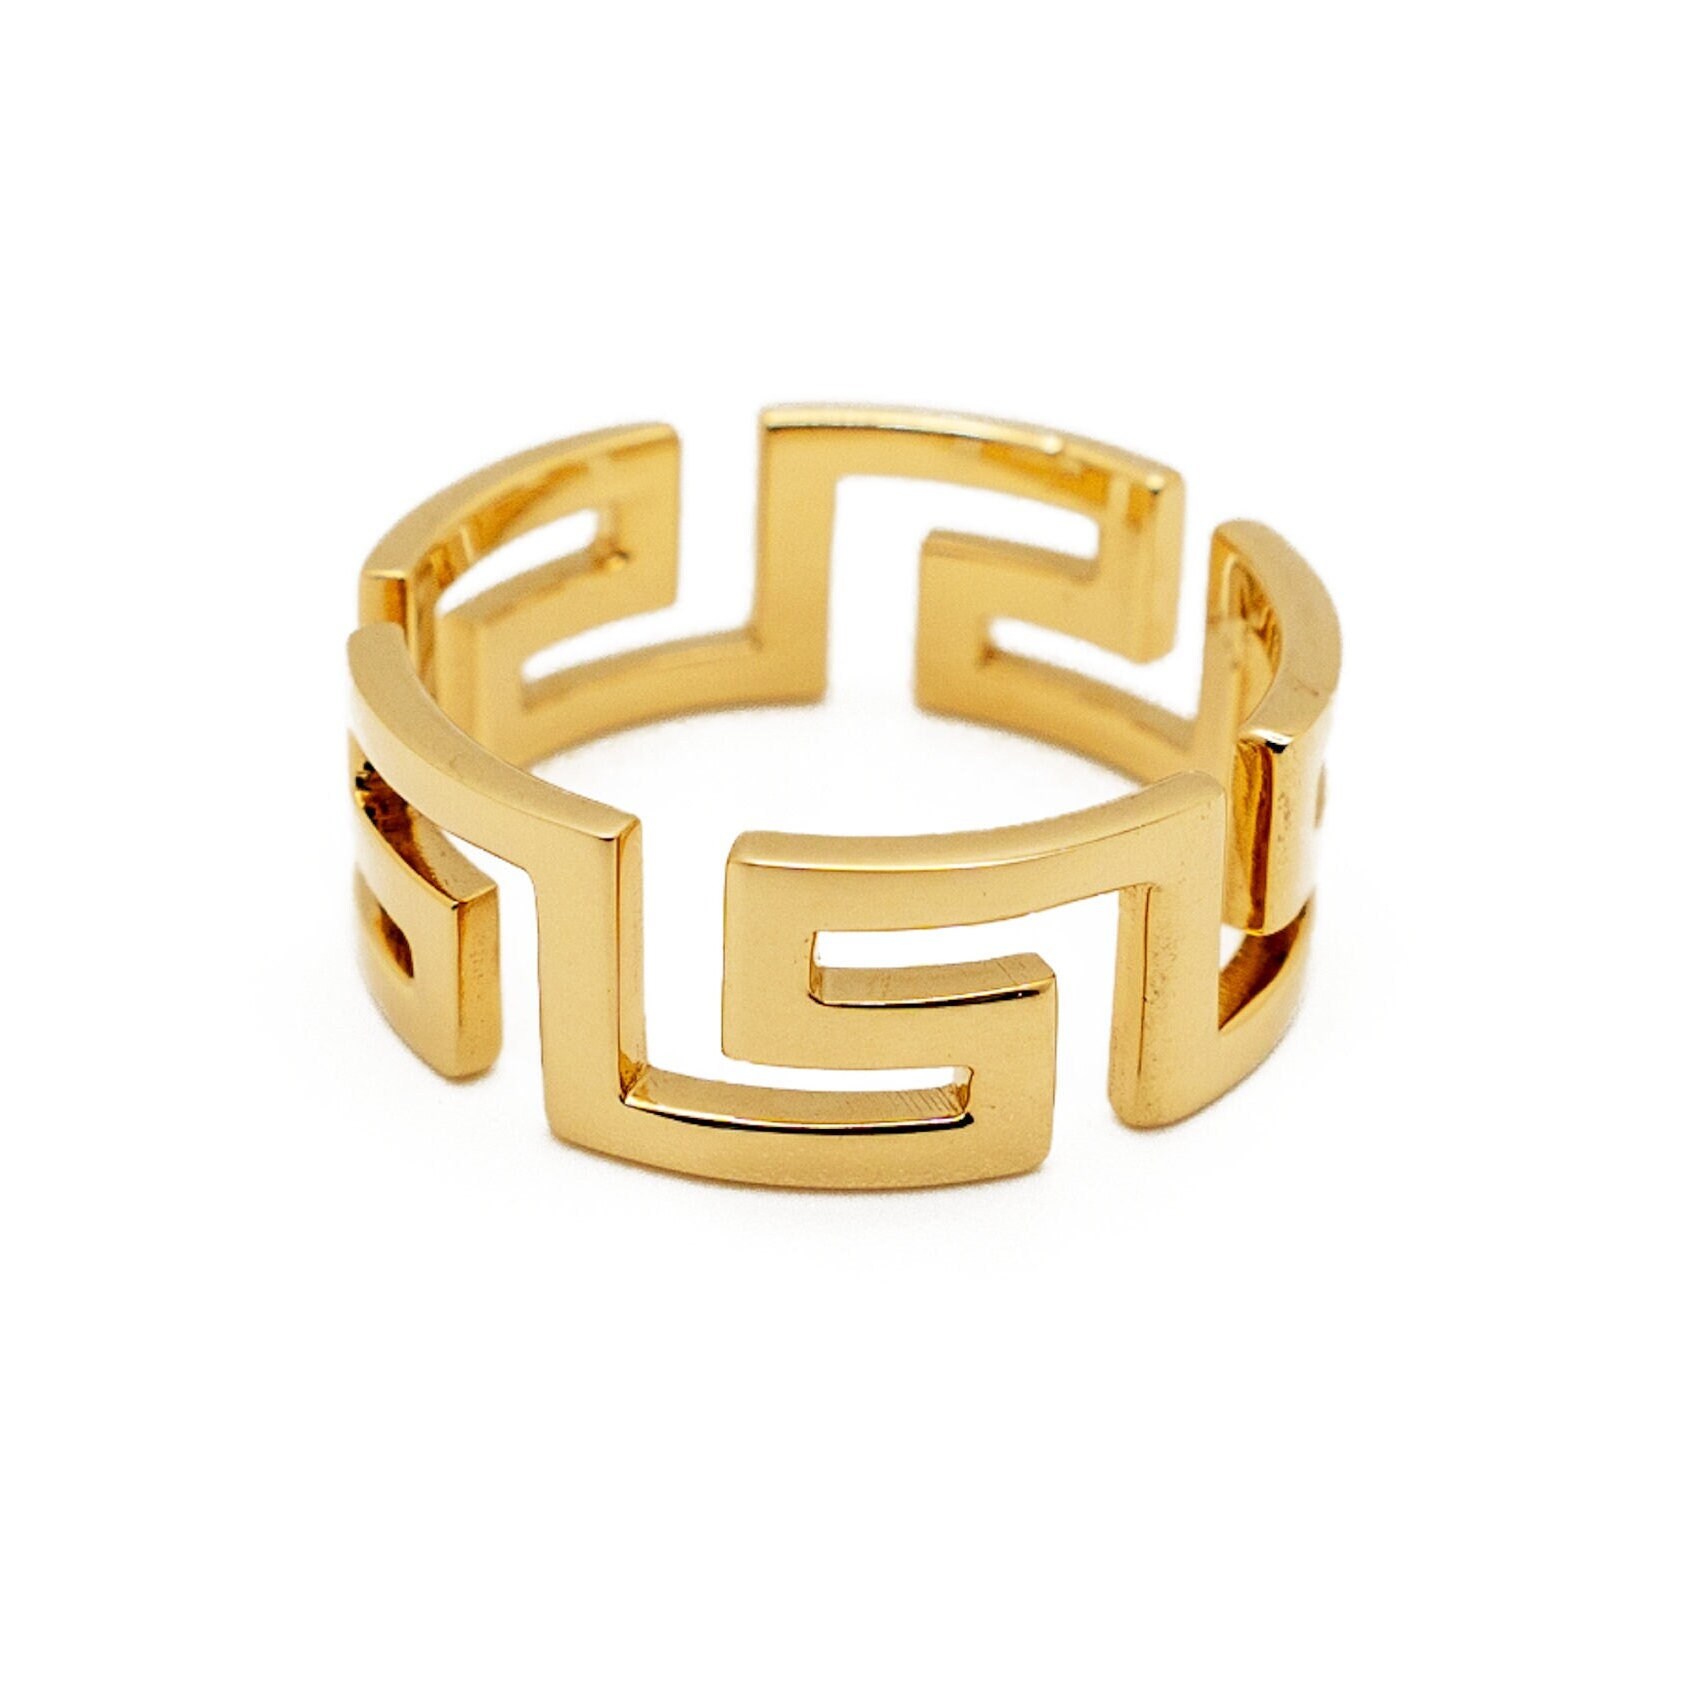 Versace Medusa Ring Made With 18K Gold by Hip Hop Industry Favorite Jeweler  TraxNYC.